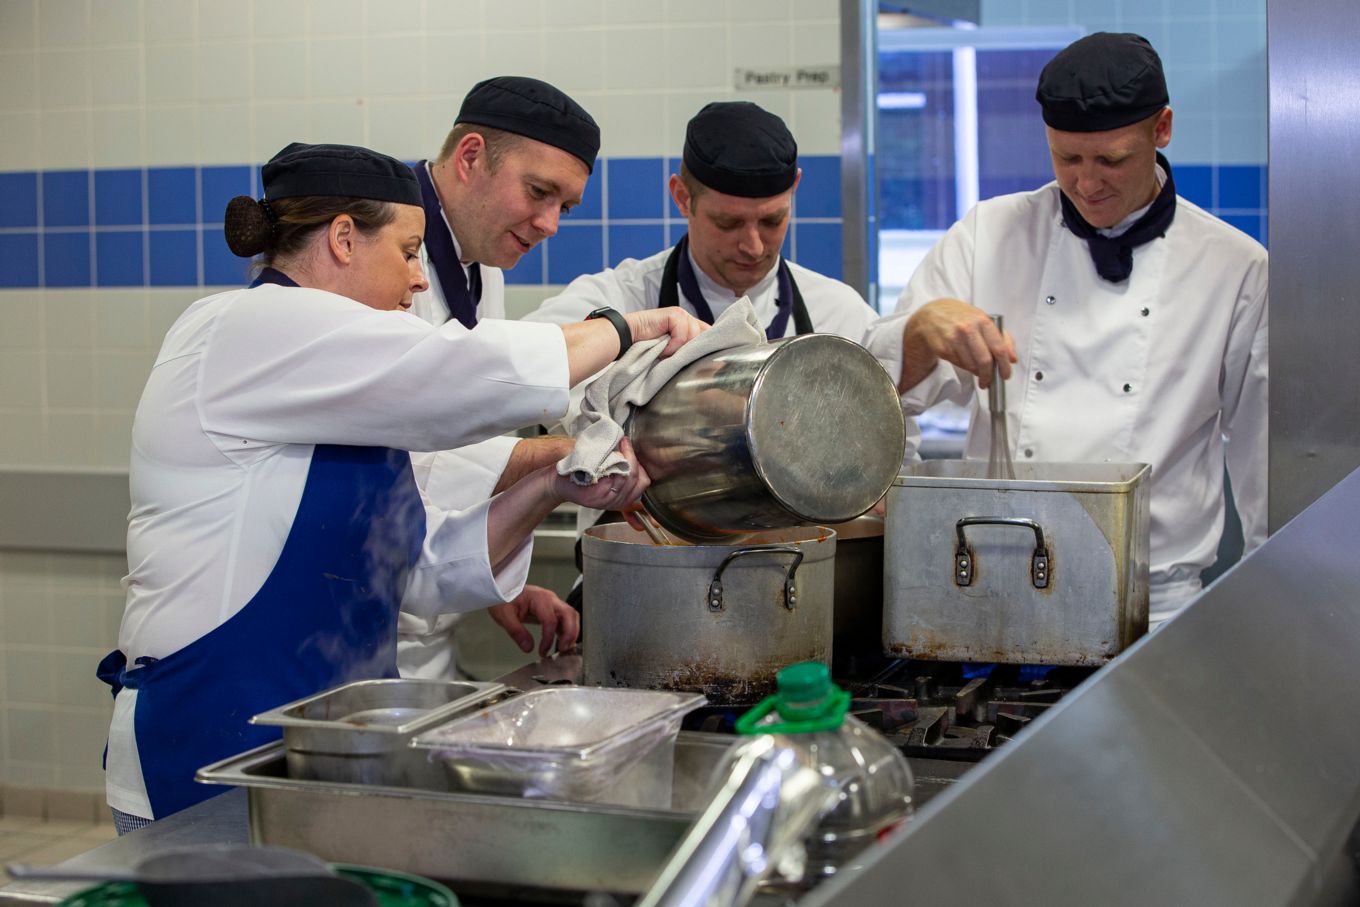 RAF Wittering’s Chefs preparing Christmas lunch.